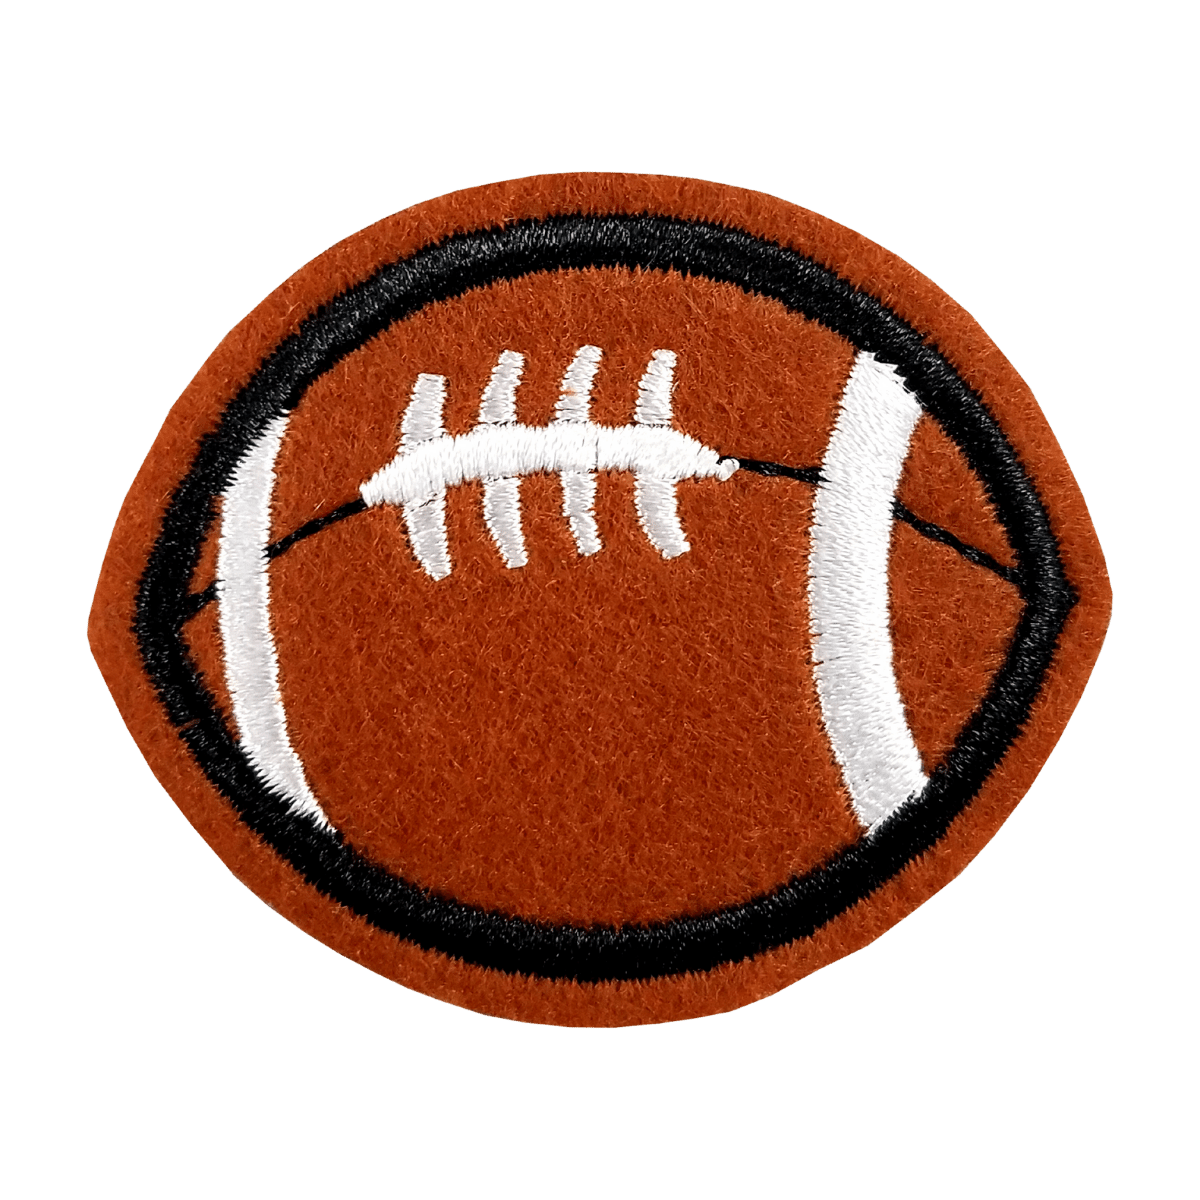 Football/Sew On Patch - JWorldstore